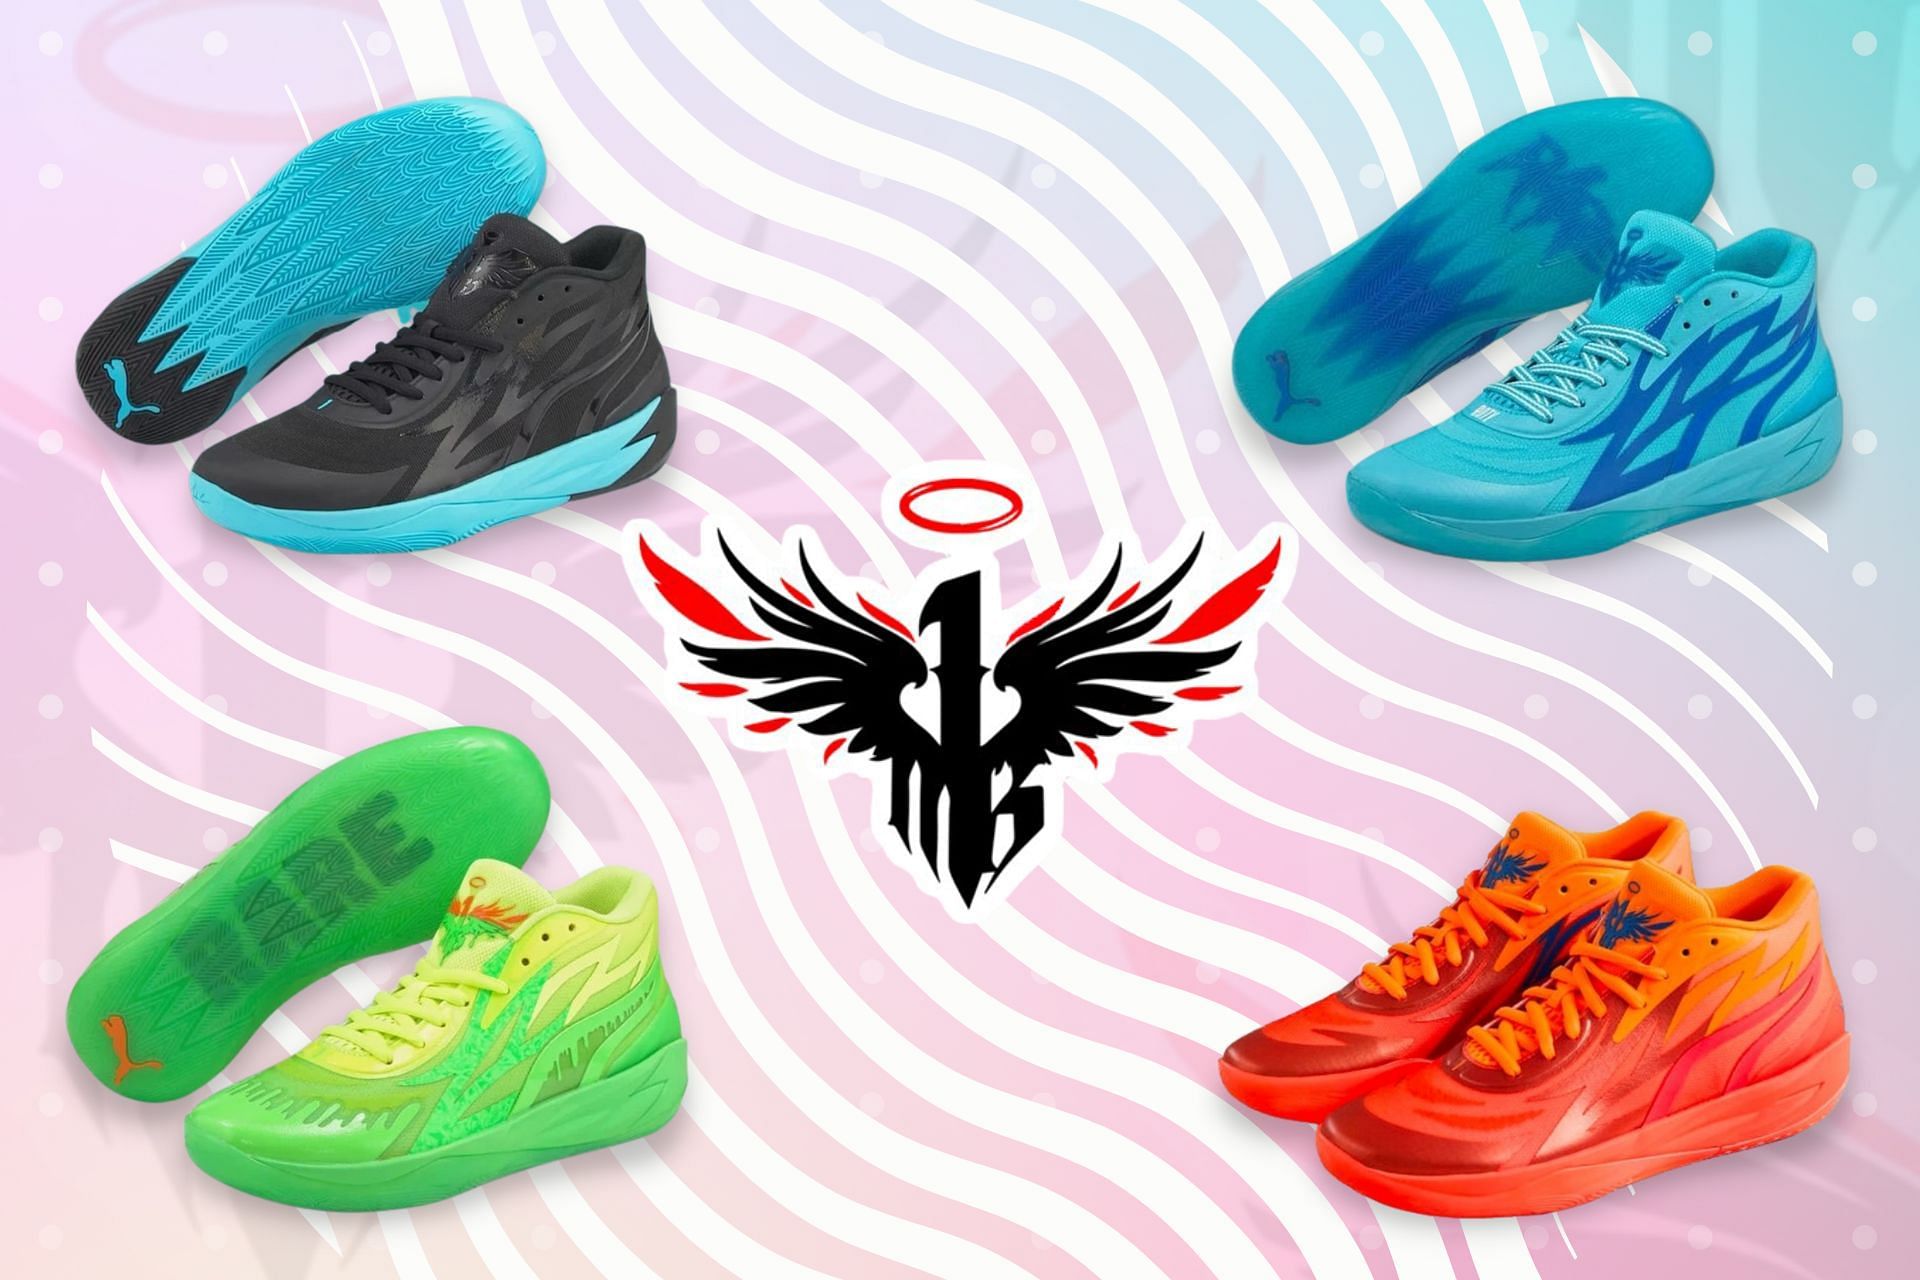 LaMelo Ball: 4 popular LaMelo Ball x Puma MB.02 colorways of 2022